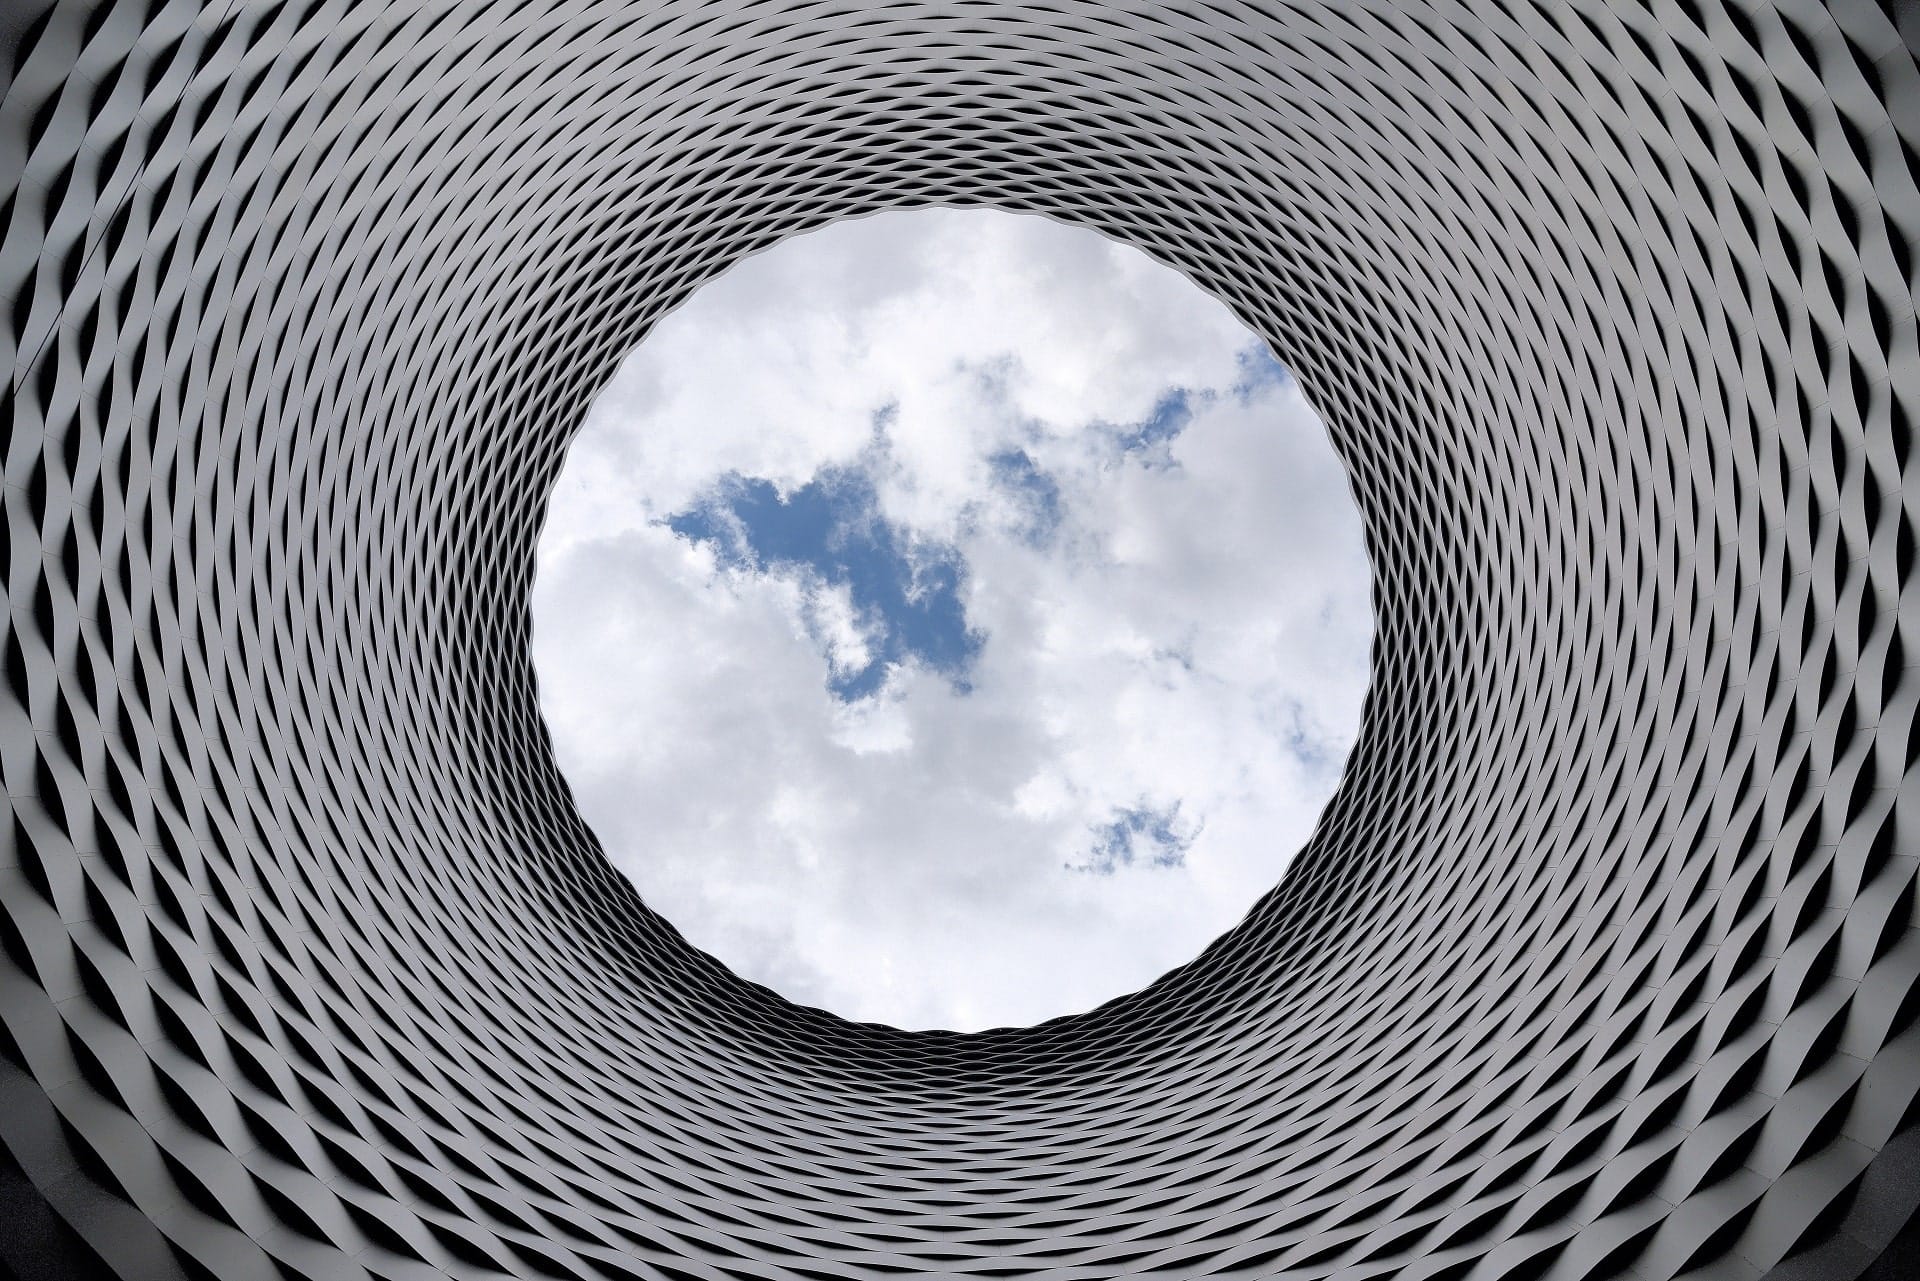 Cloud Services in San Jose, CA--represented by a view of clouds through a cylindrical sculpture. | ExoIS